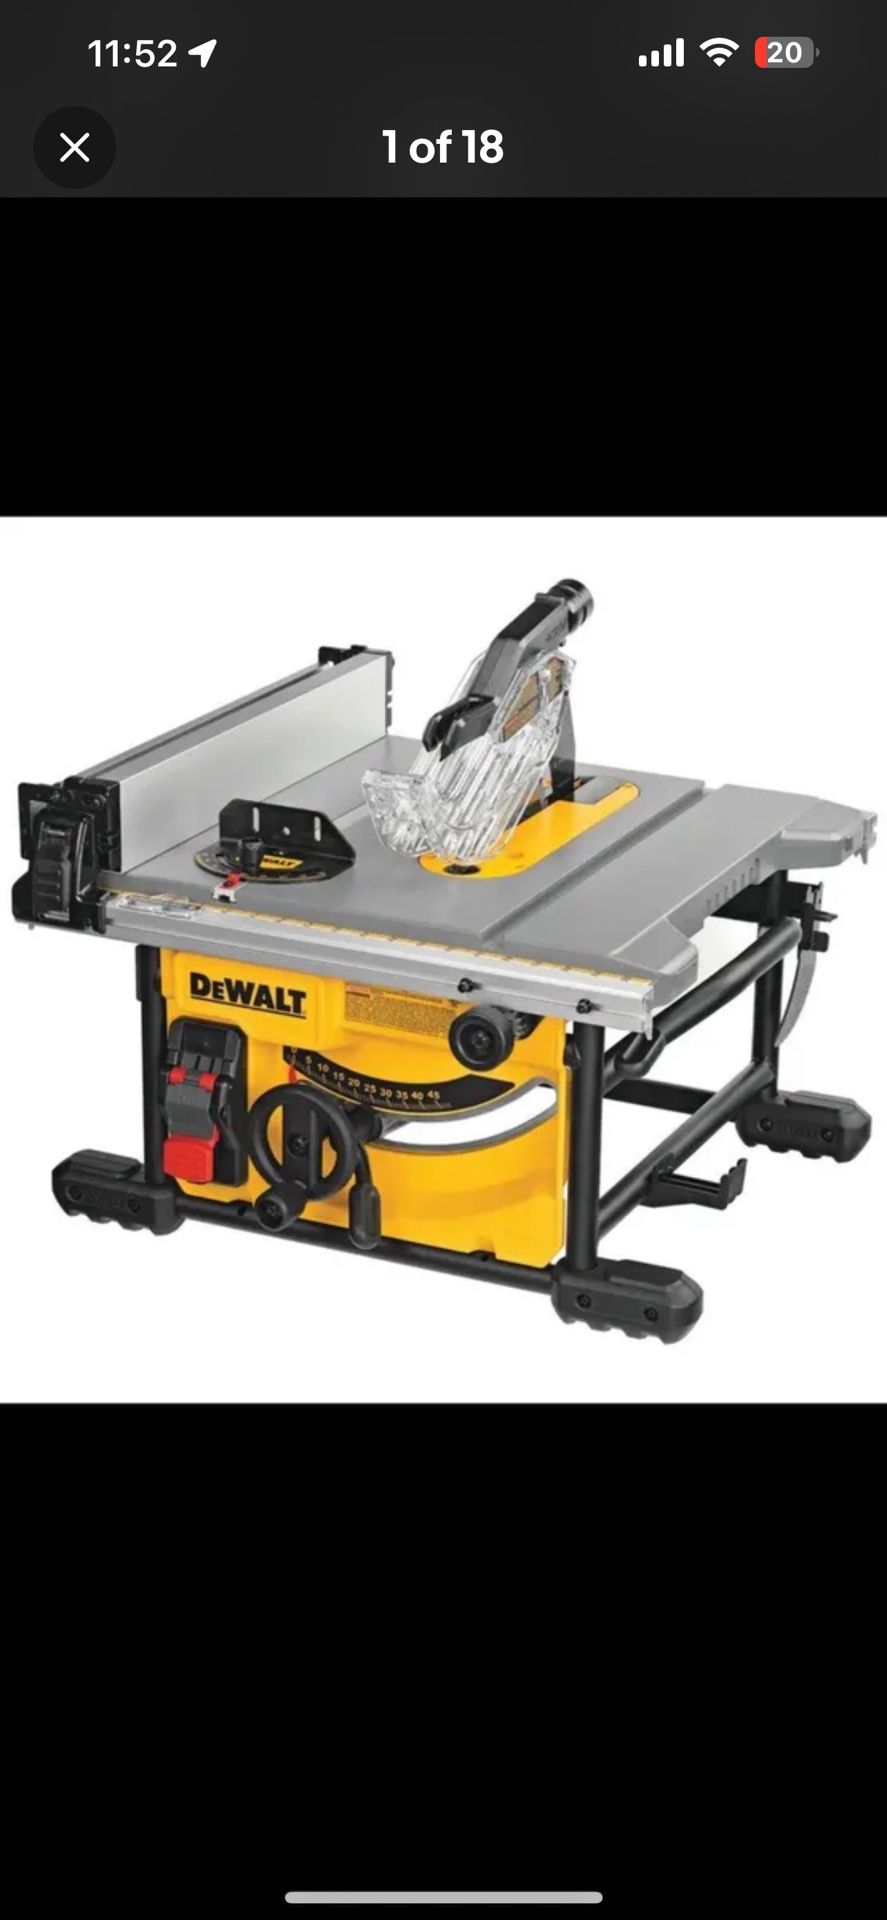 DEWALT DWE7485 8-1/4" Corded Electric Jobsite Table Saw With Aluminum Stand Mint